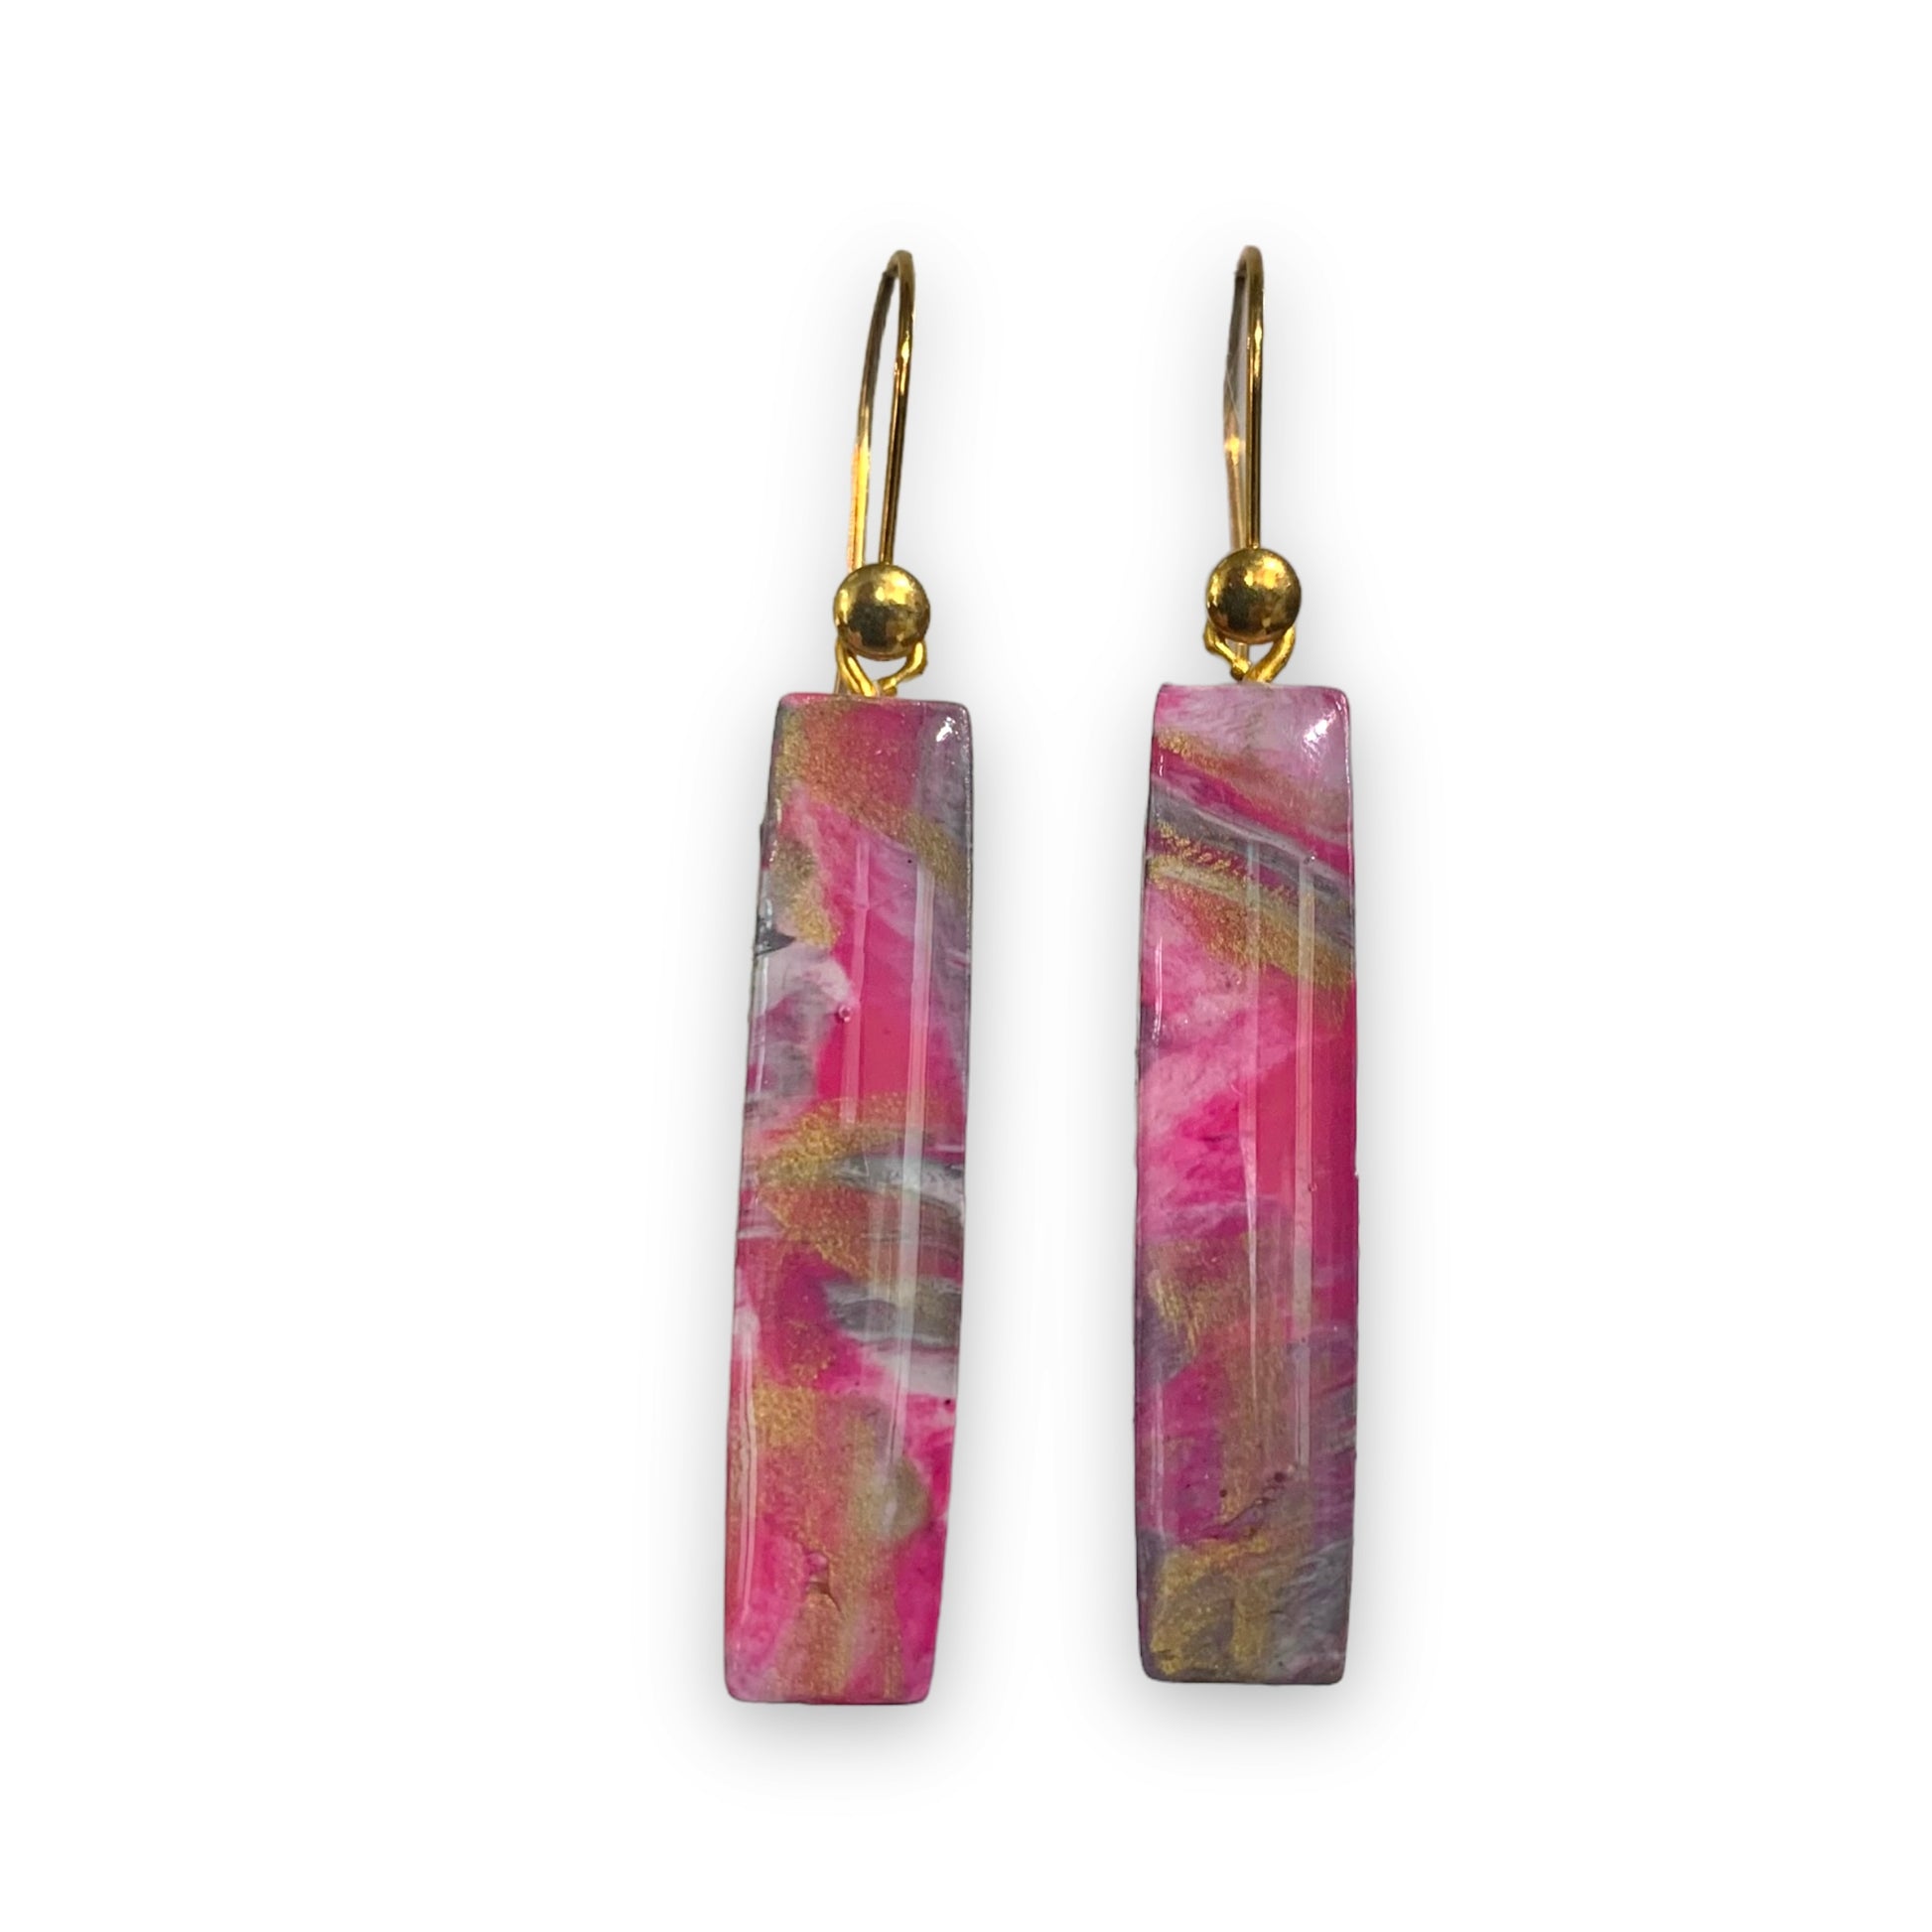 Recycled Plastic Bottle Tops Jewellery Dangle Earrings drops handmade in the UK pink gold rectangles ethical Christmas gift 